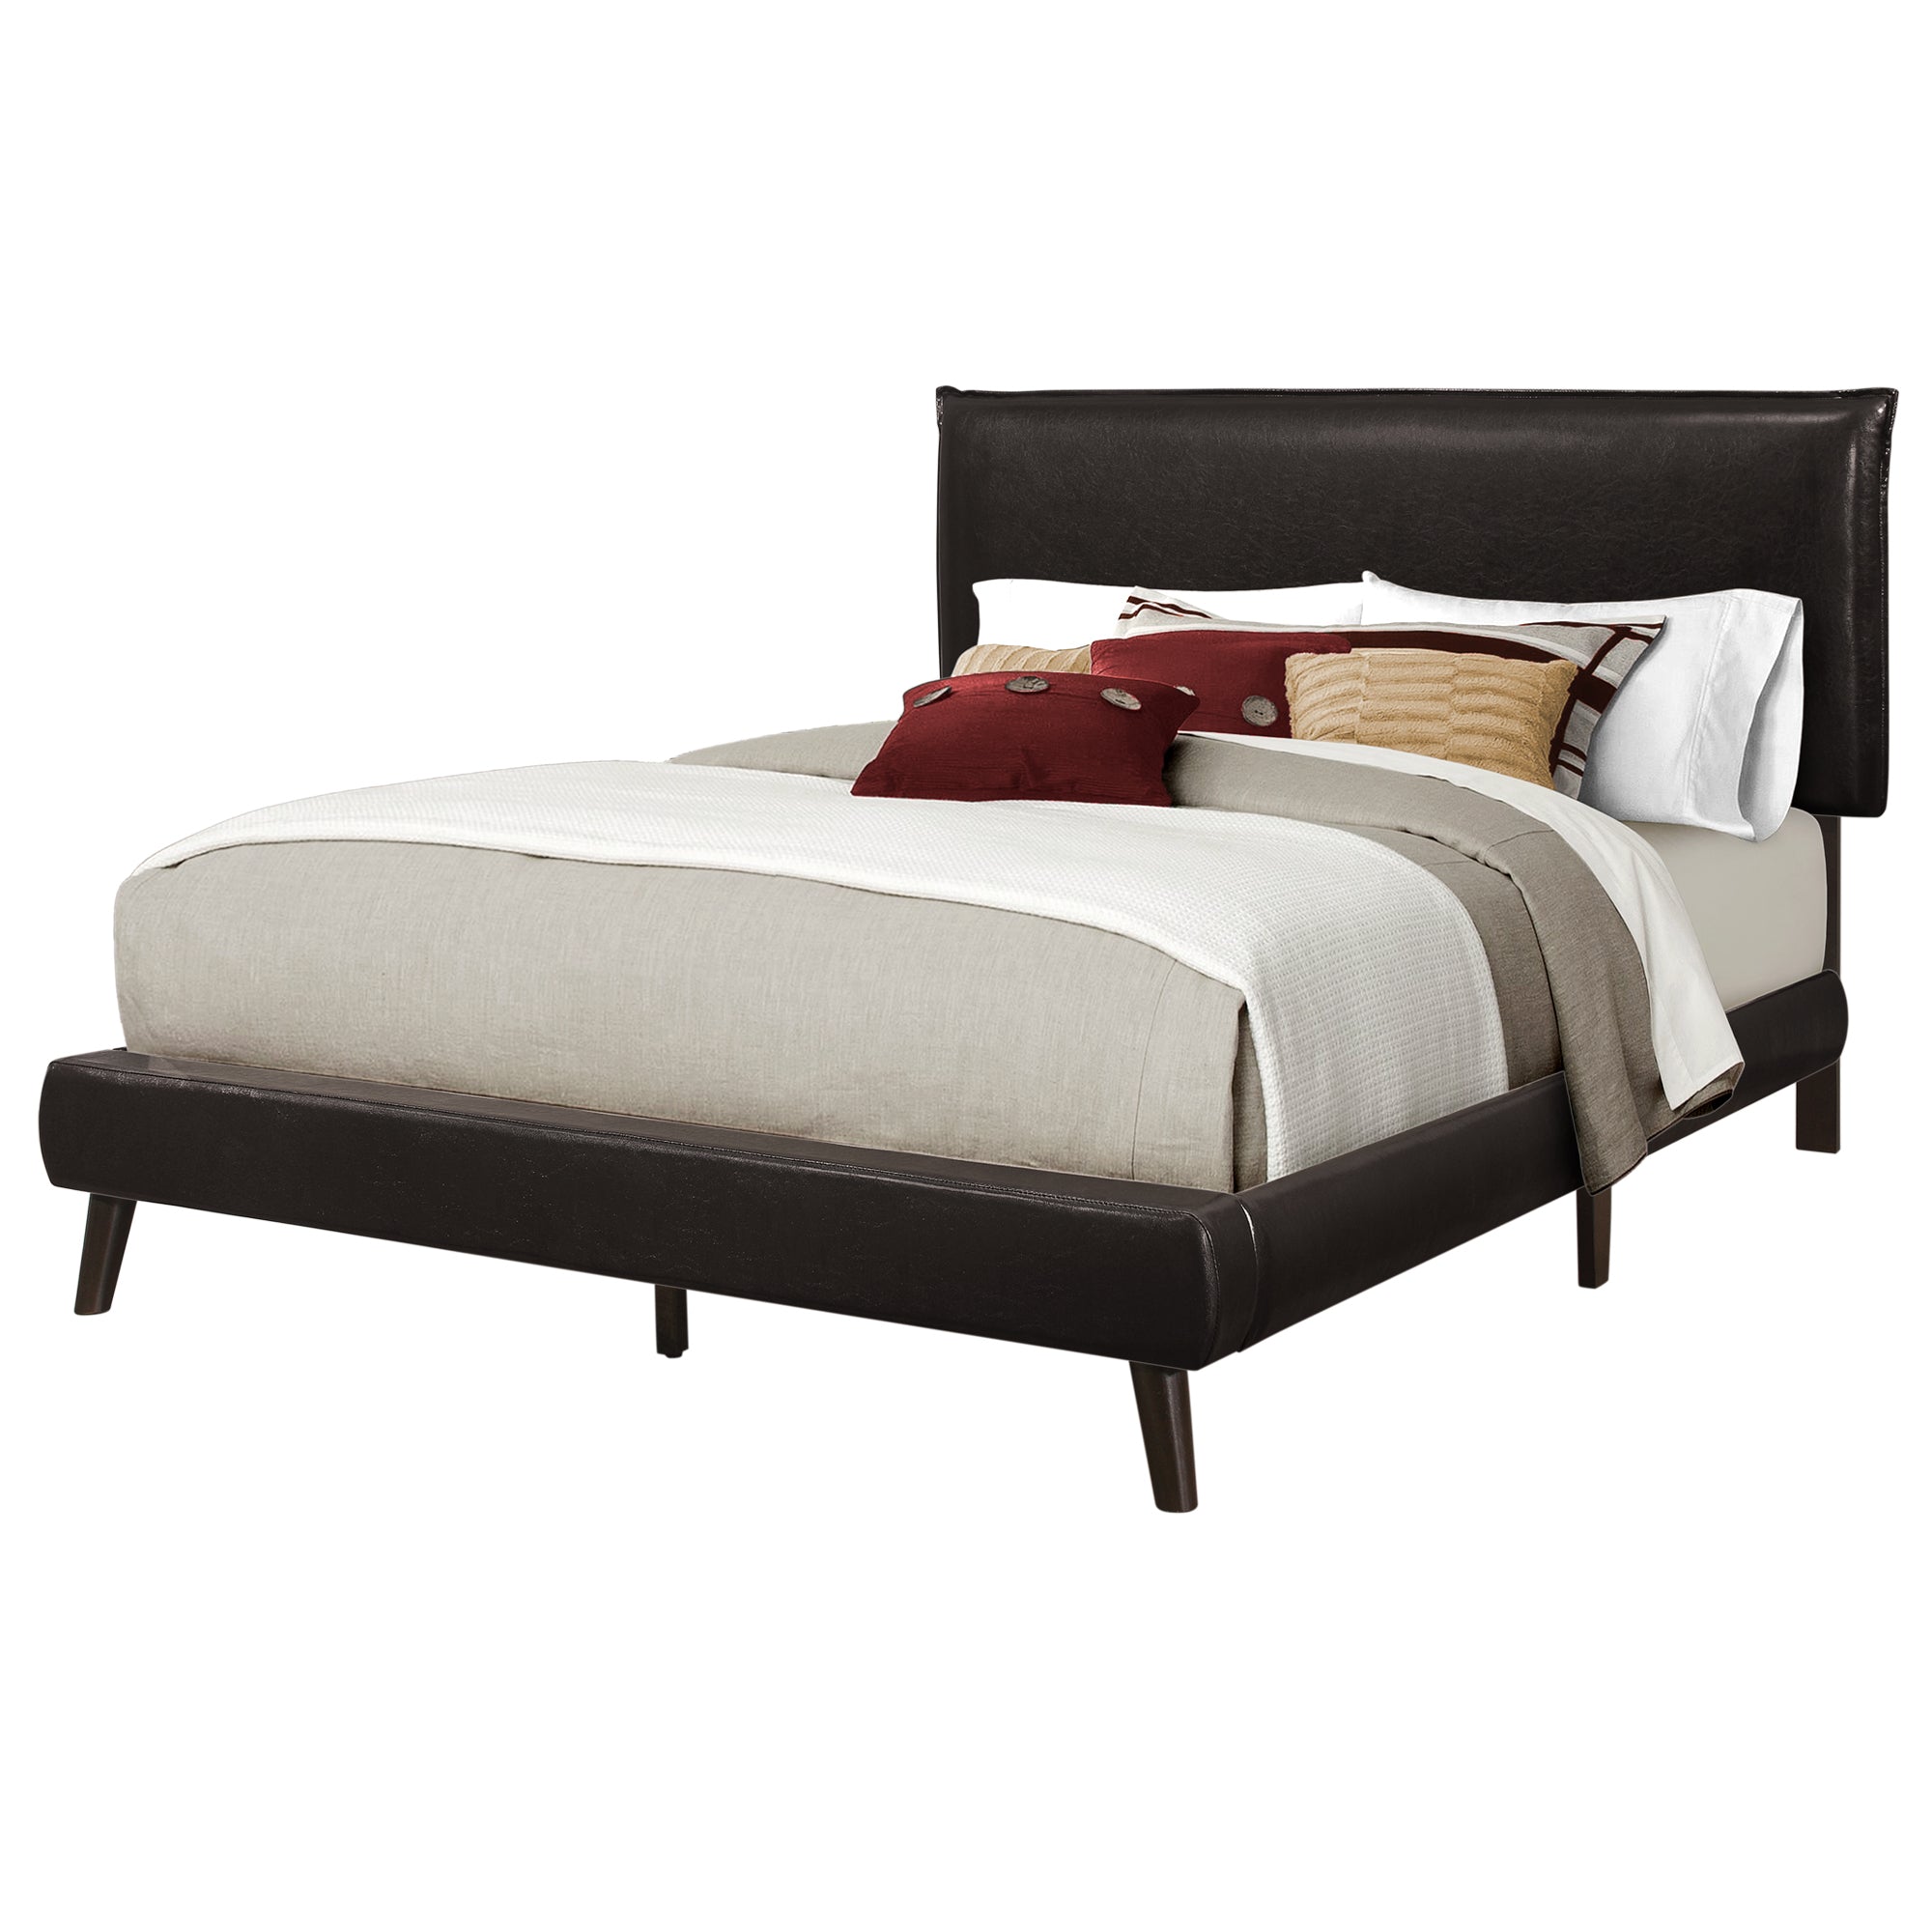 Bed - Queen Size / Brown Leather-Look With Wood Legs